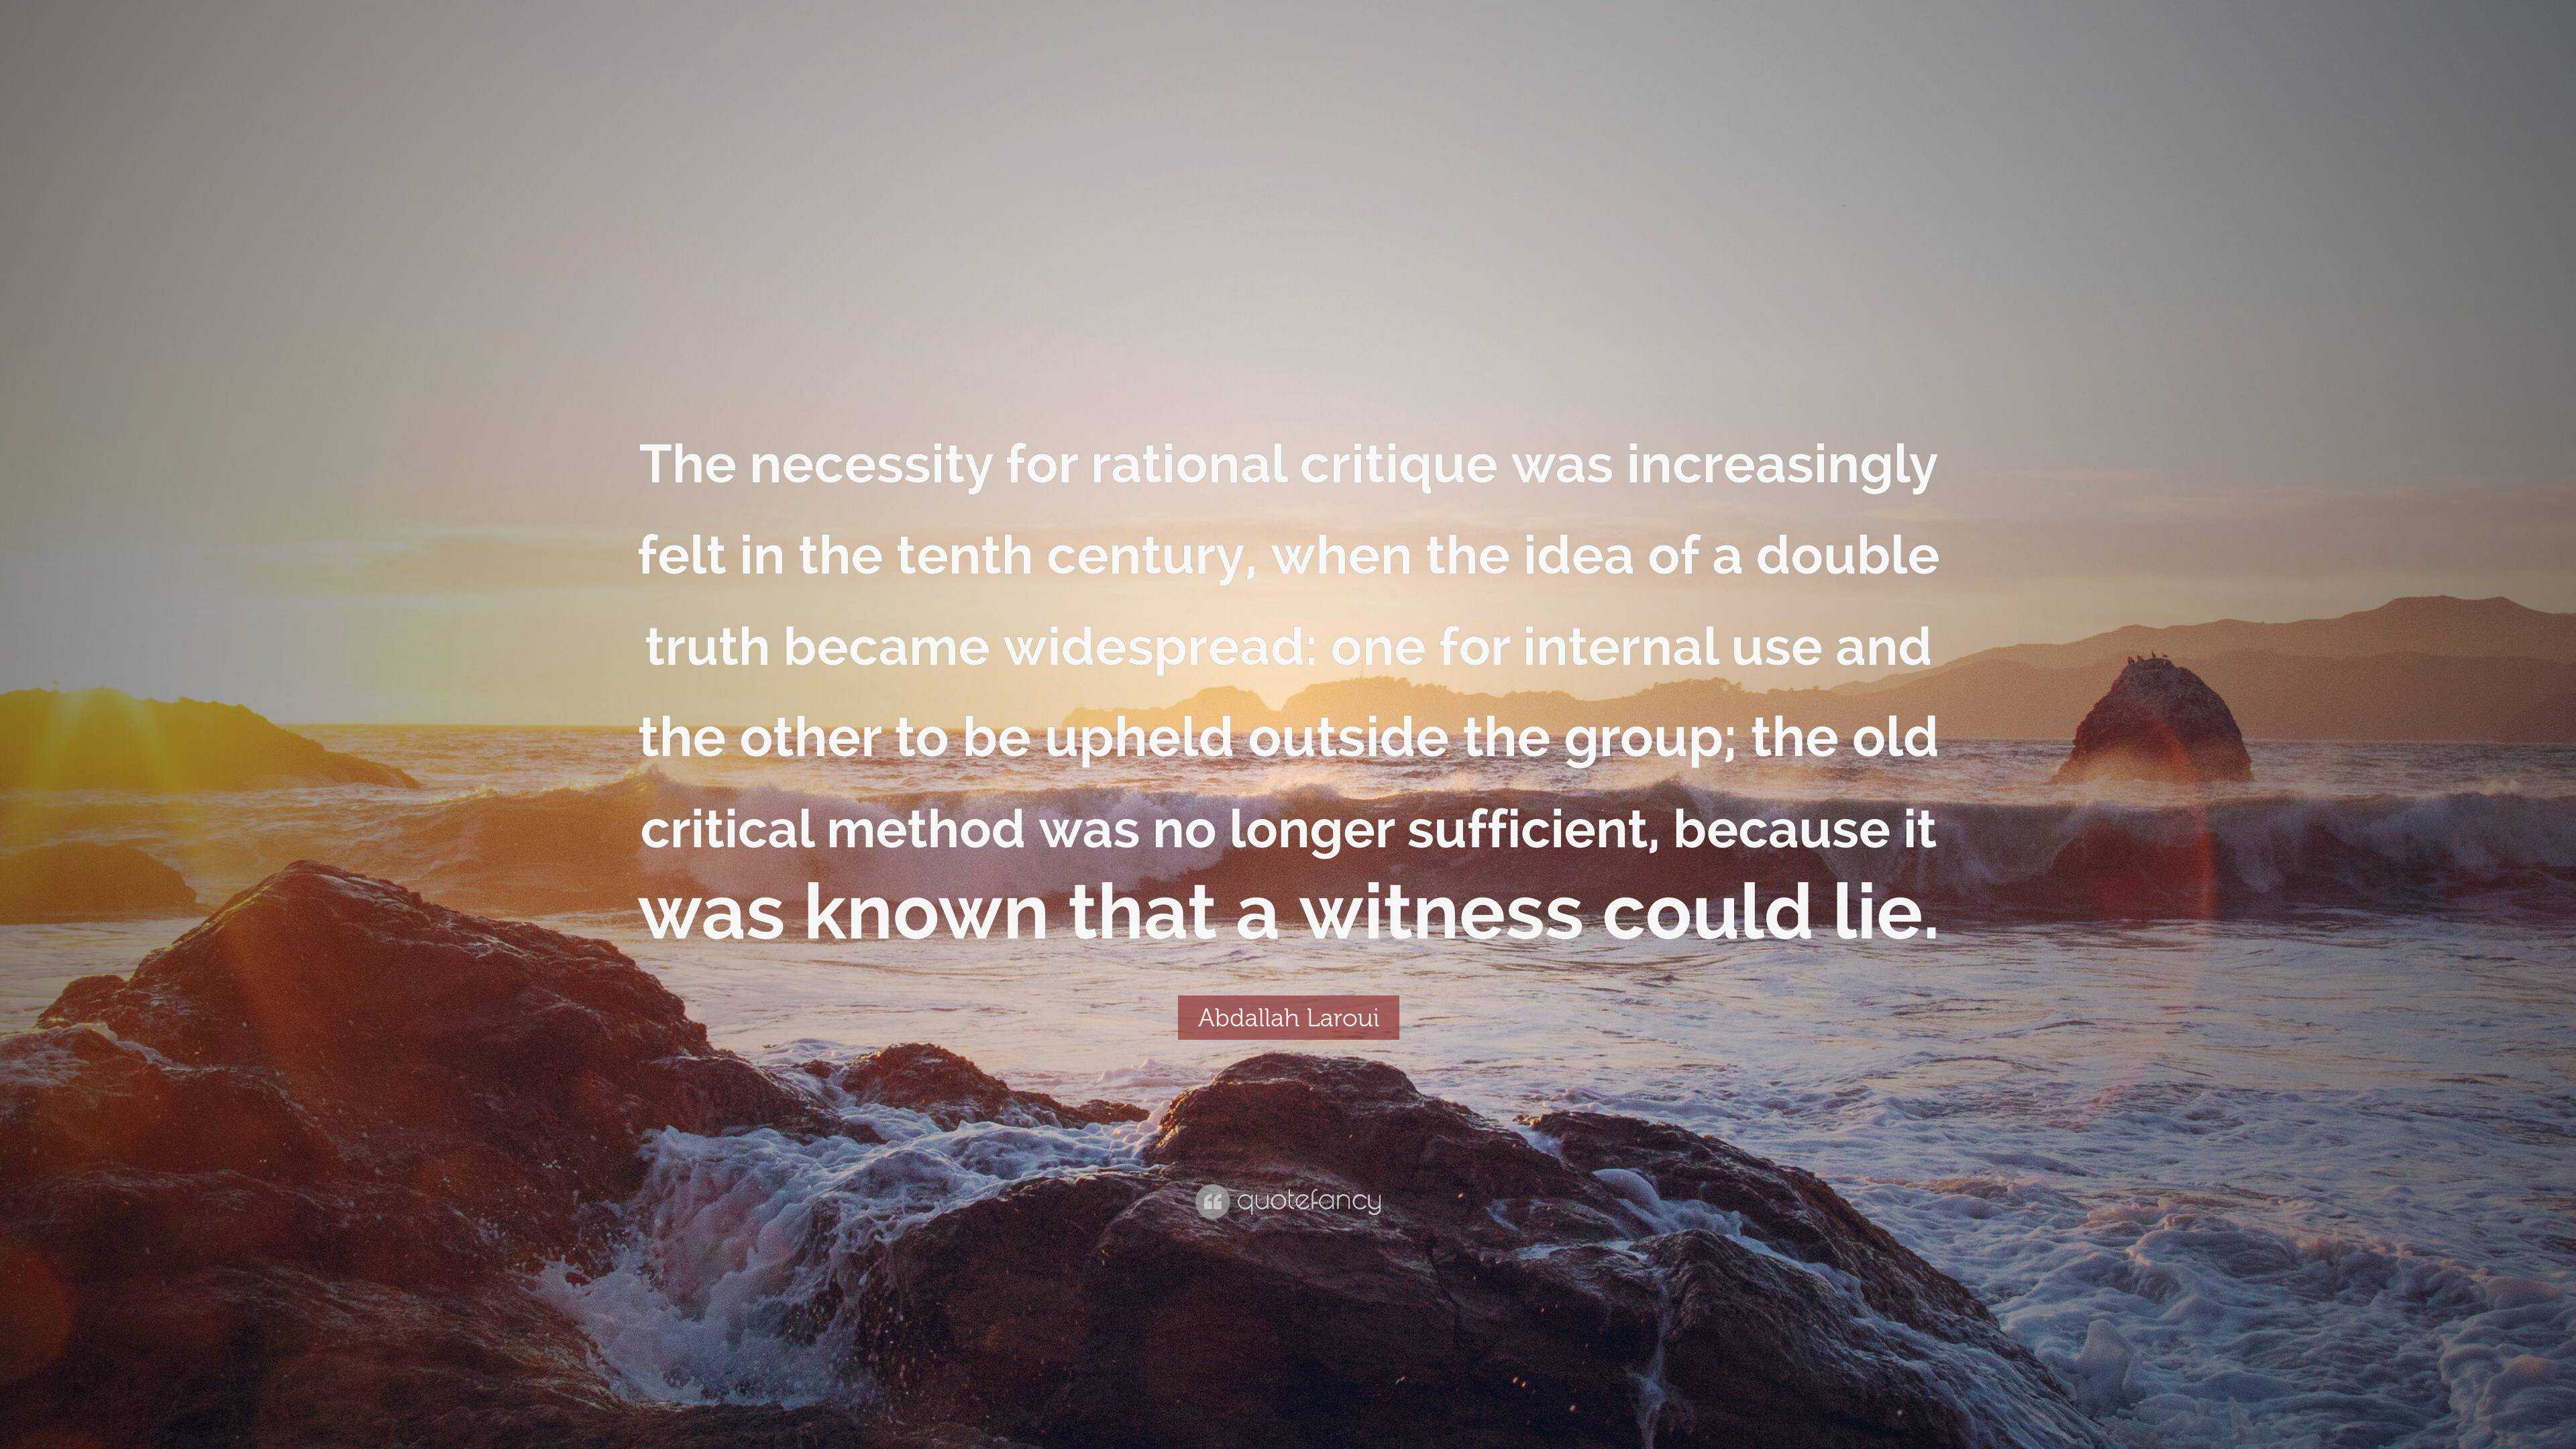 Abdallah Laroui Quote: “The necessity for rational critique was ...